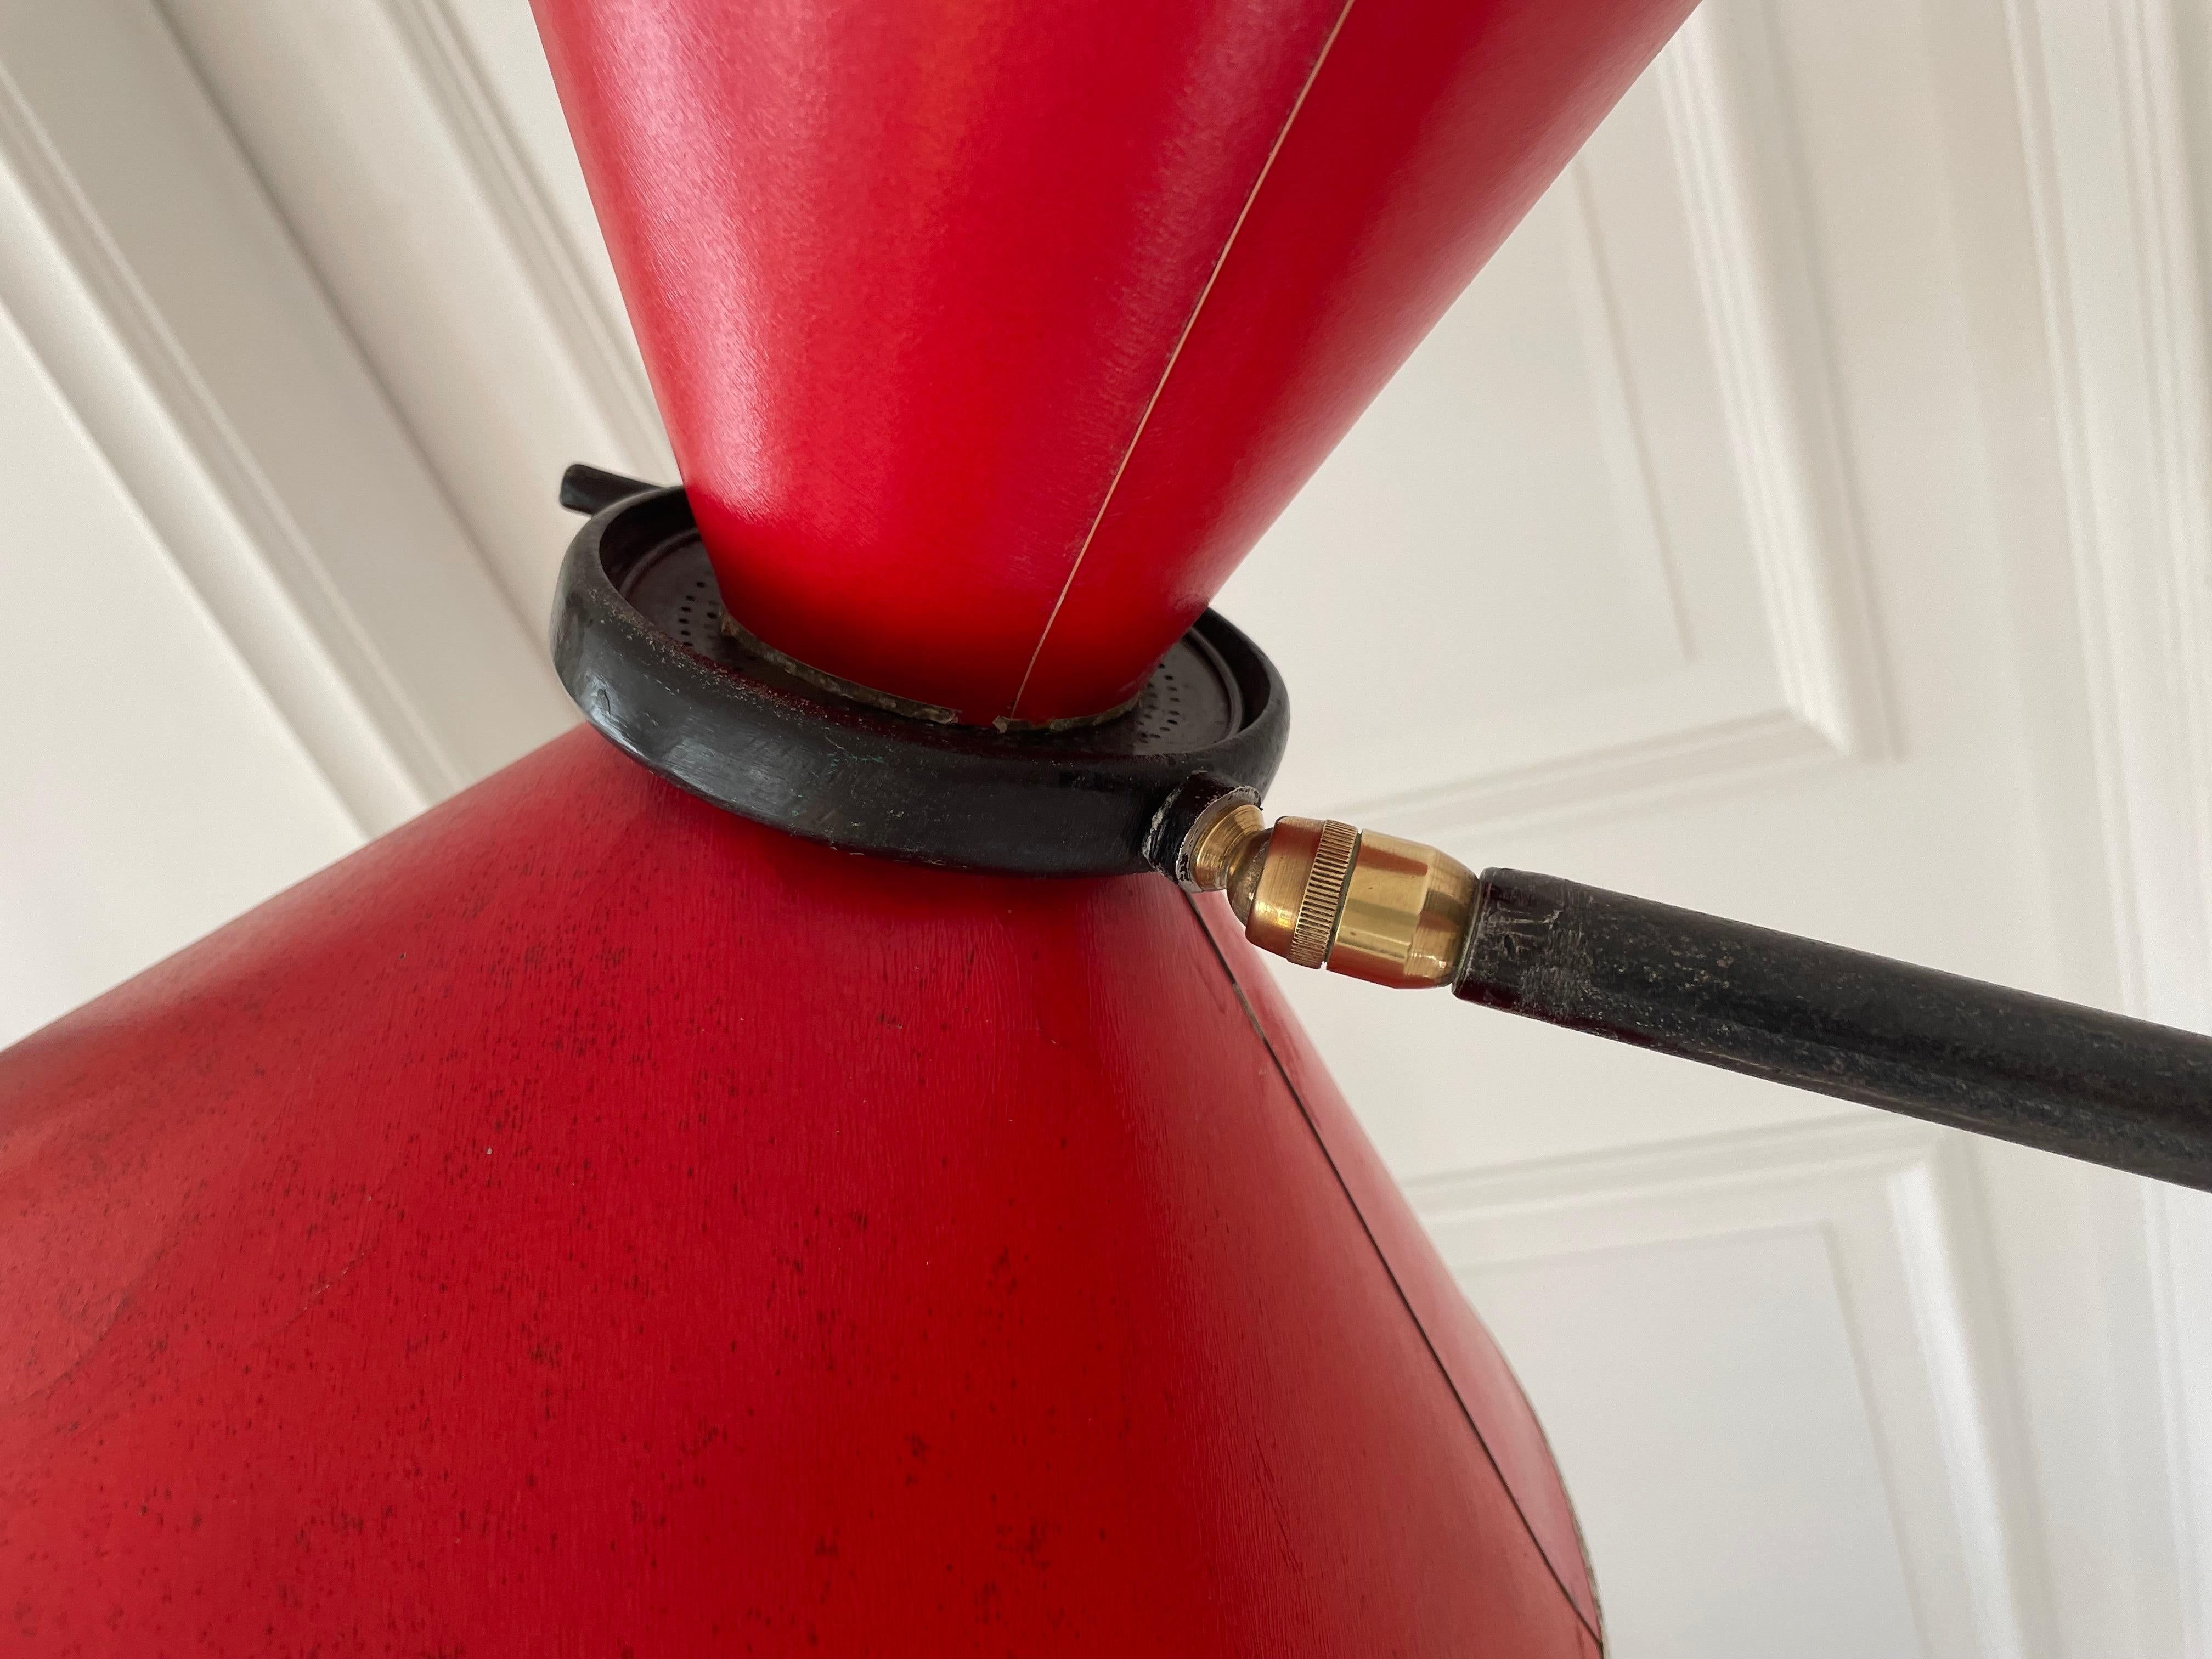 Adjustable blackened wrought iron floor lamp with his original red diabolo shade.
Brass ball joint, 2 lights and newly rewired.
By Maison Lunel- France 1954.